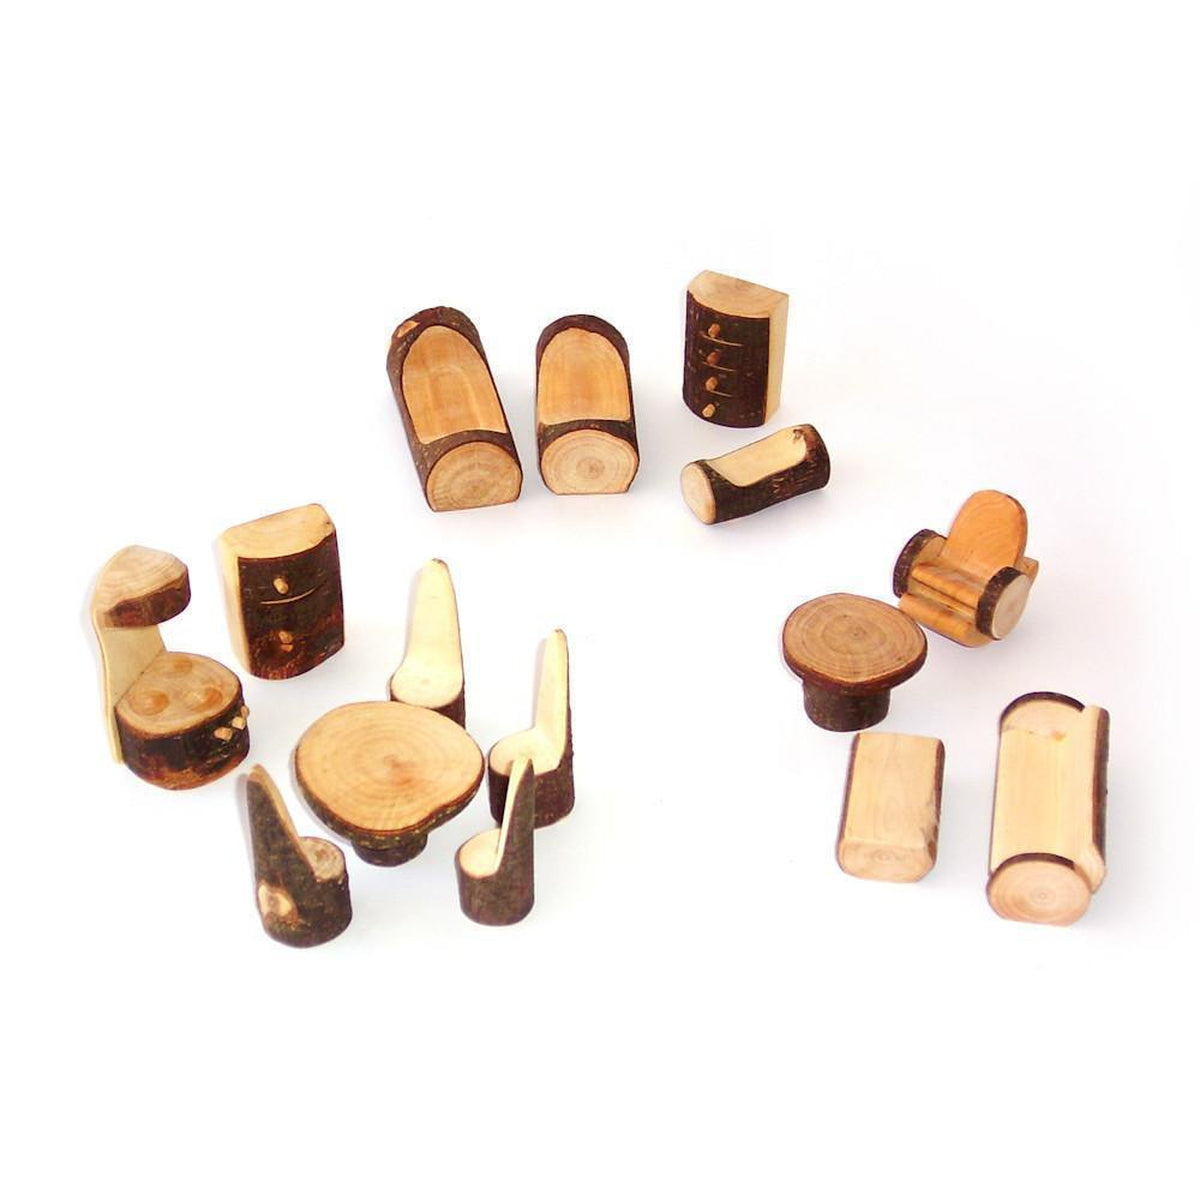 raw wood furniture set-people, animals & lands-Decor Spielzeug Wooden Toys-Dilly Dally Kids